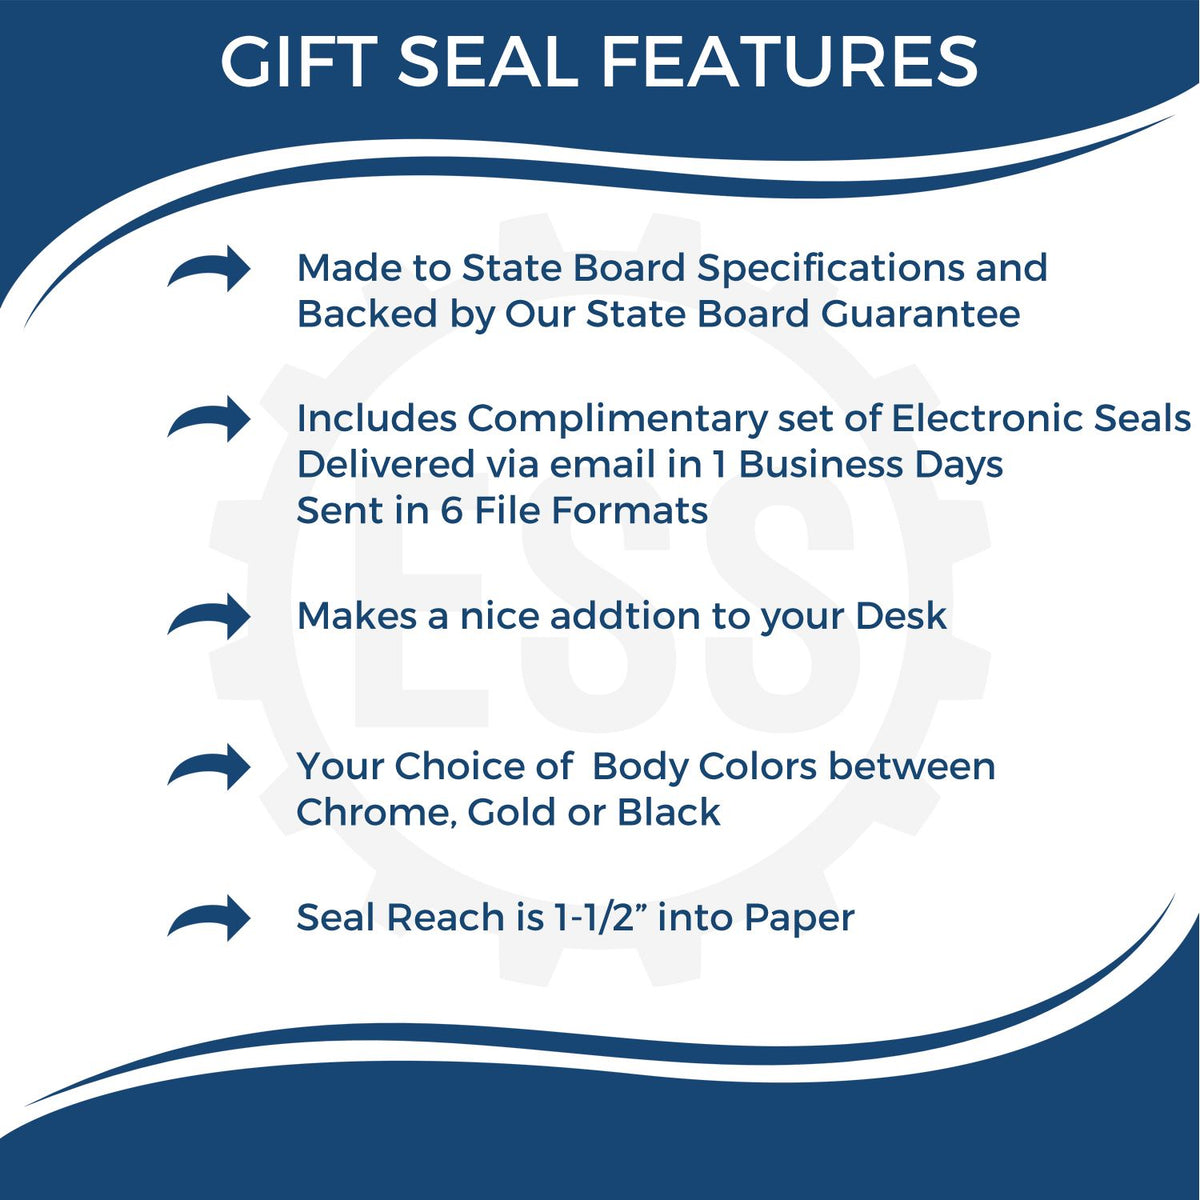 A picture of an infographic highlighting the selling points for the Gift New Hampshire Architect Seal